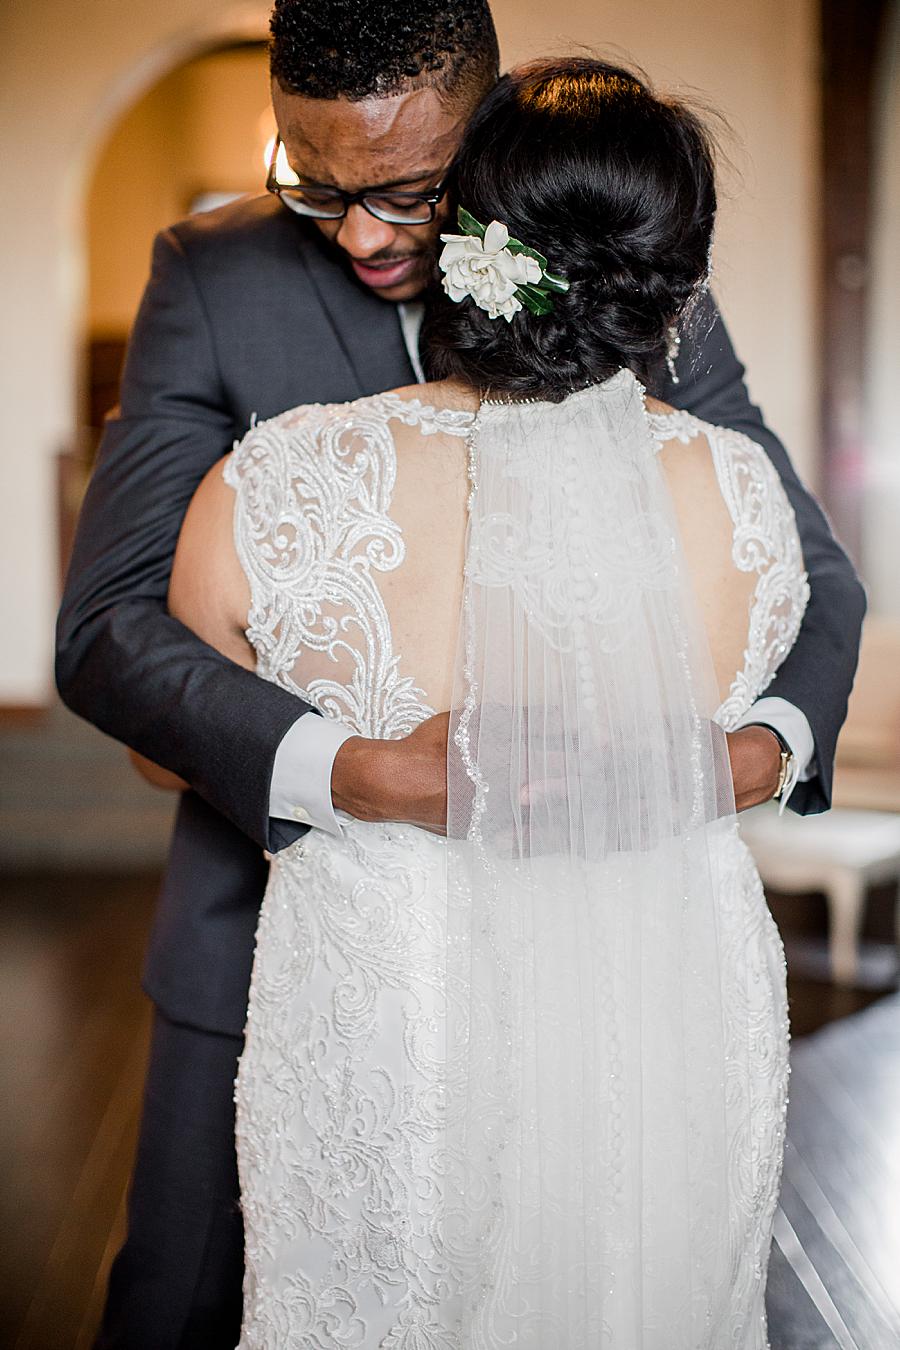 Veil detail at this Holston Hills Country Club wedding by Knoxville Wedding Photographer, Amanda May Photos.